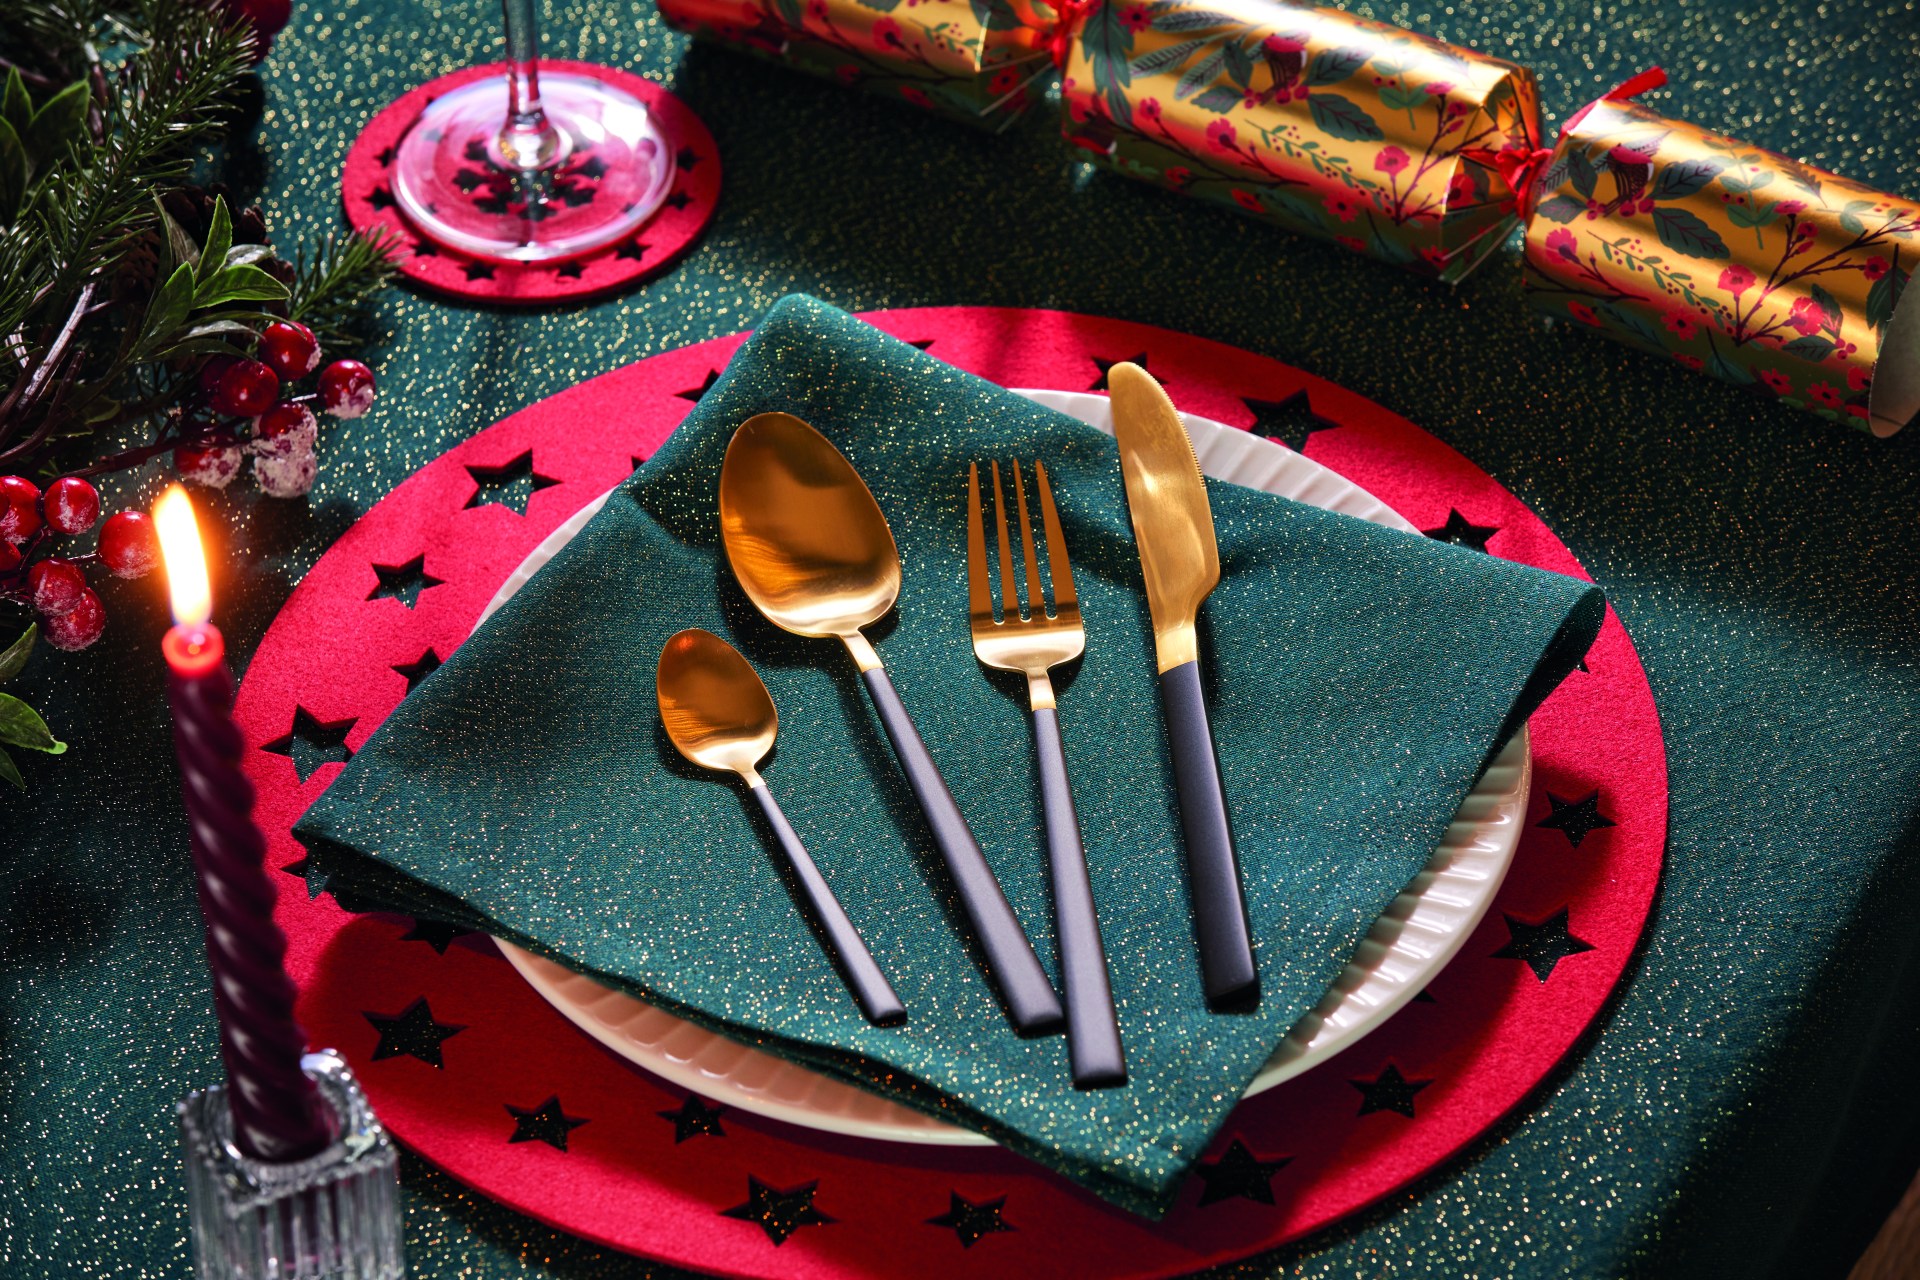 amazon, aldi have launched christmassy dinnerware essentials from £2.99 including plates